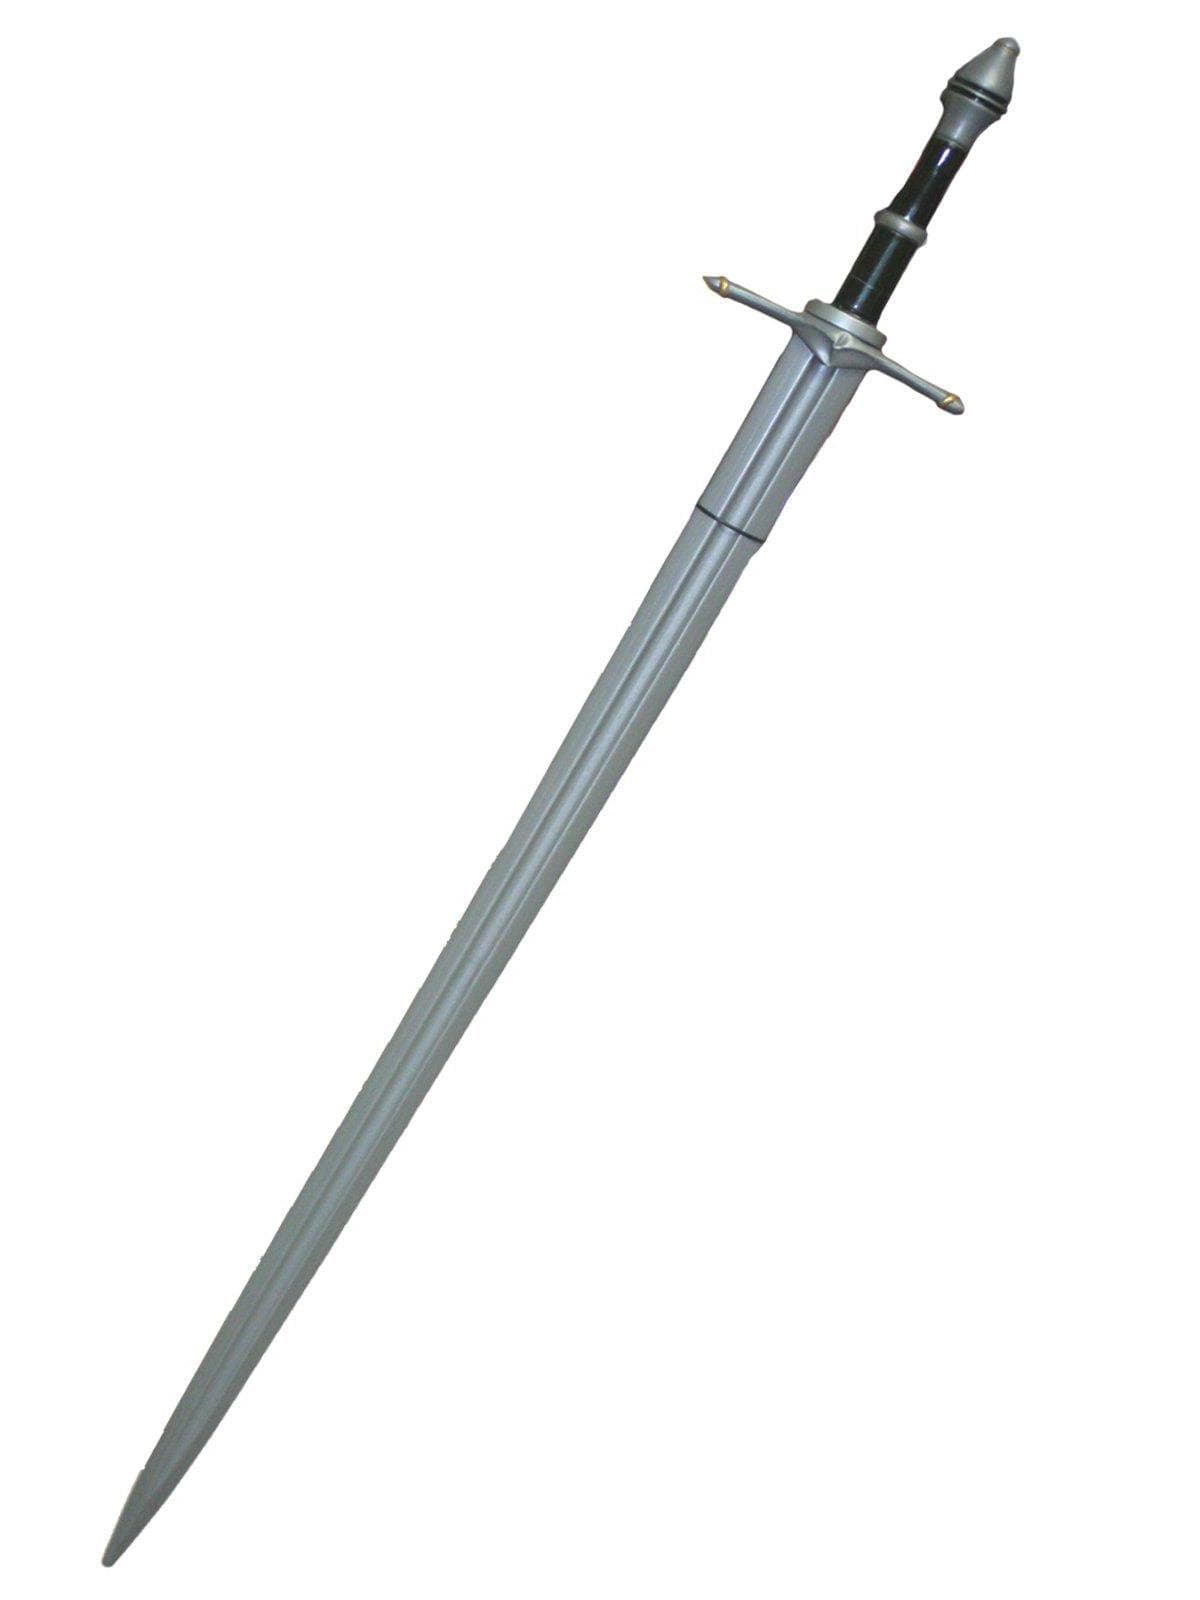 Adult Lord of the Rings Aragorn Sword - costumes.com